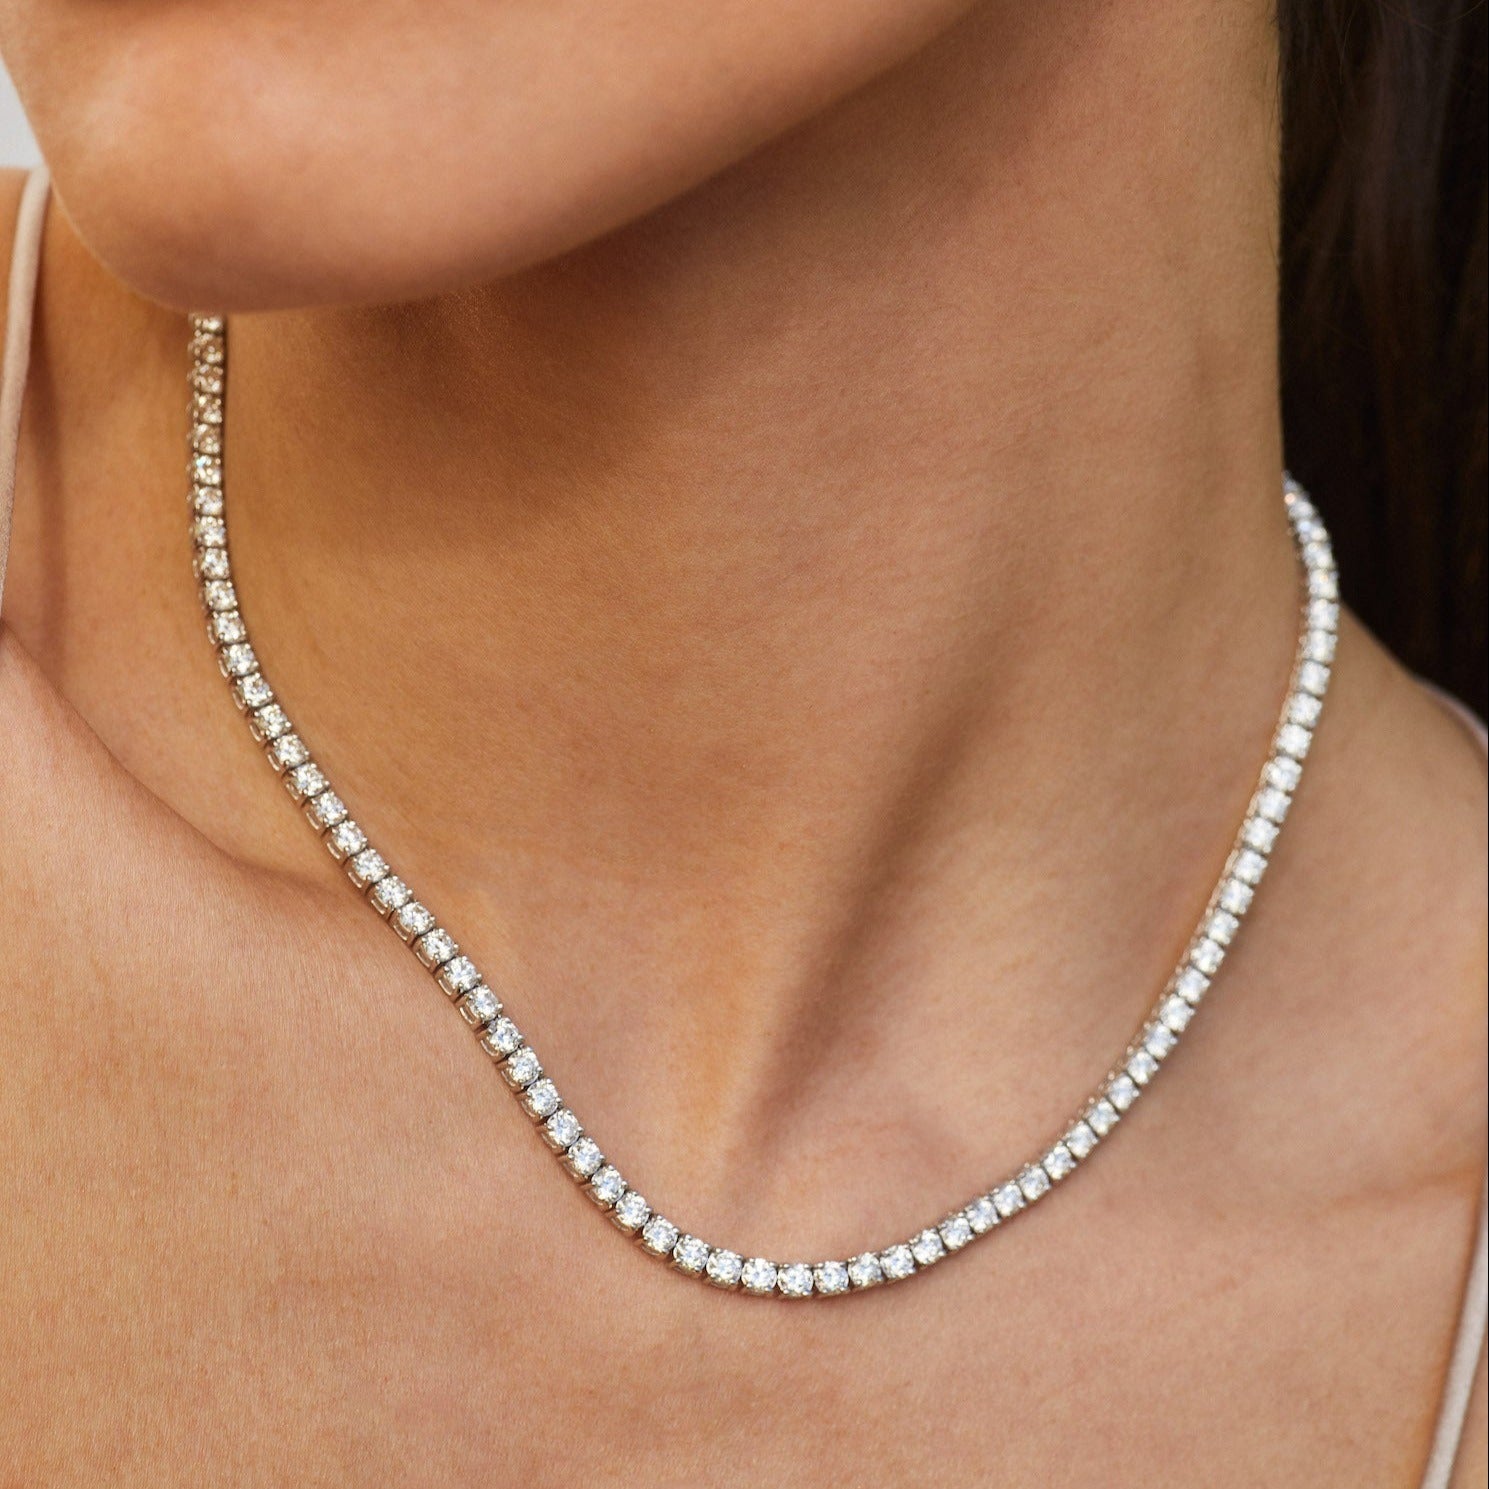 Diamond Tennis Necklace in white gold styled on neck of model